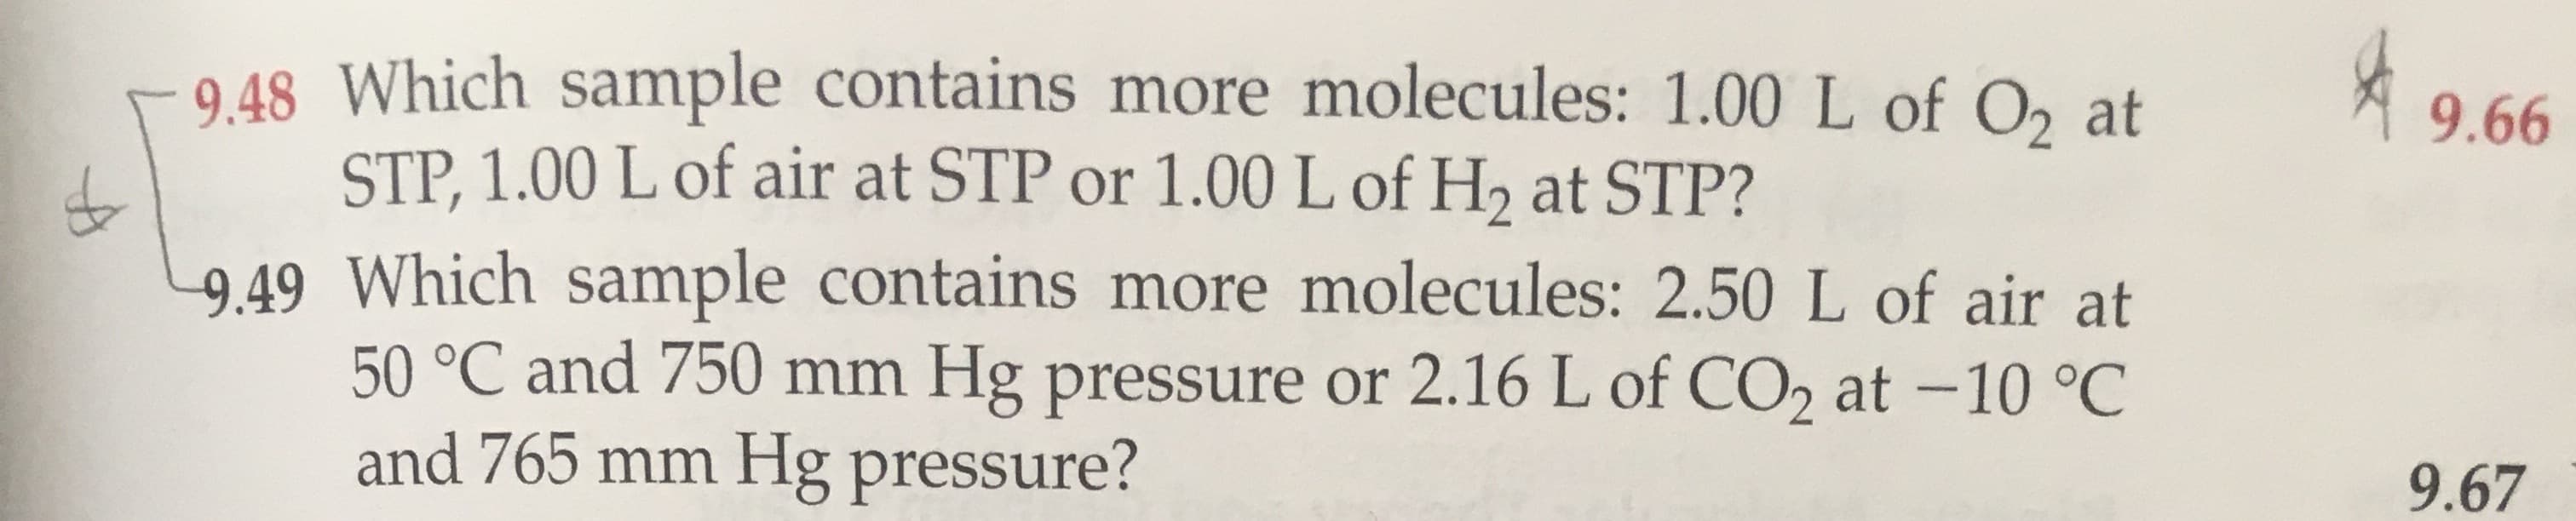 - 9.48 Which sample contains more molecules: 1.00 L of O, at
STP, 1.00 L of air at STP or 1.00 L of H, at STP?
